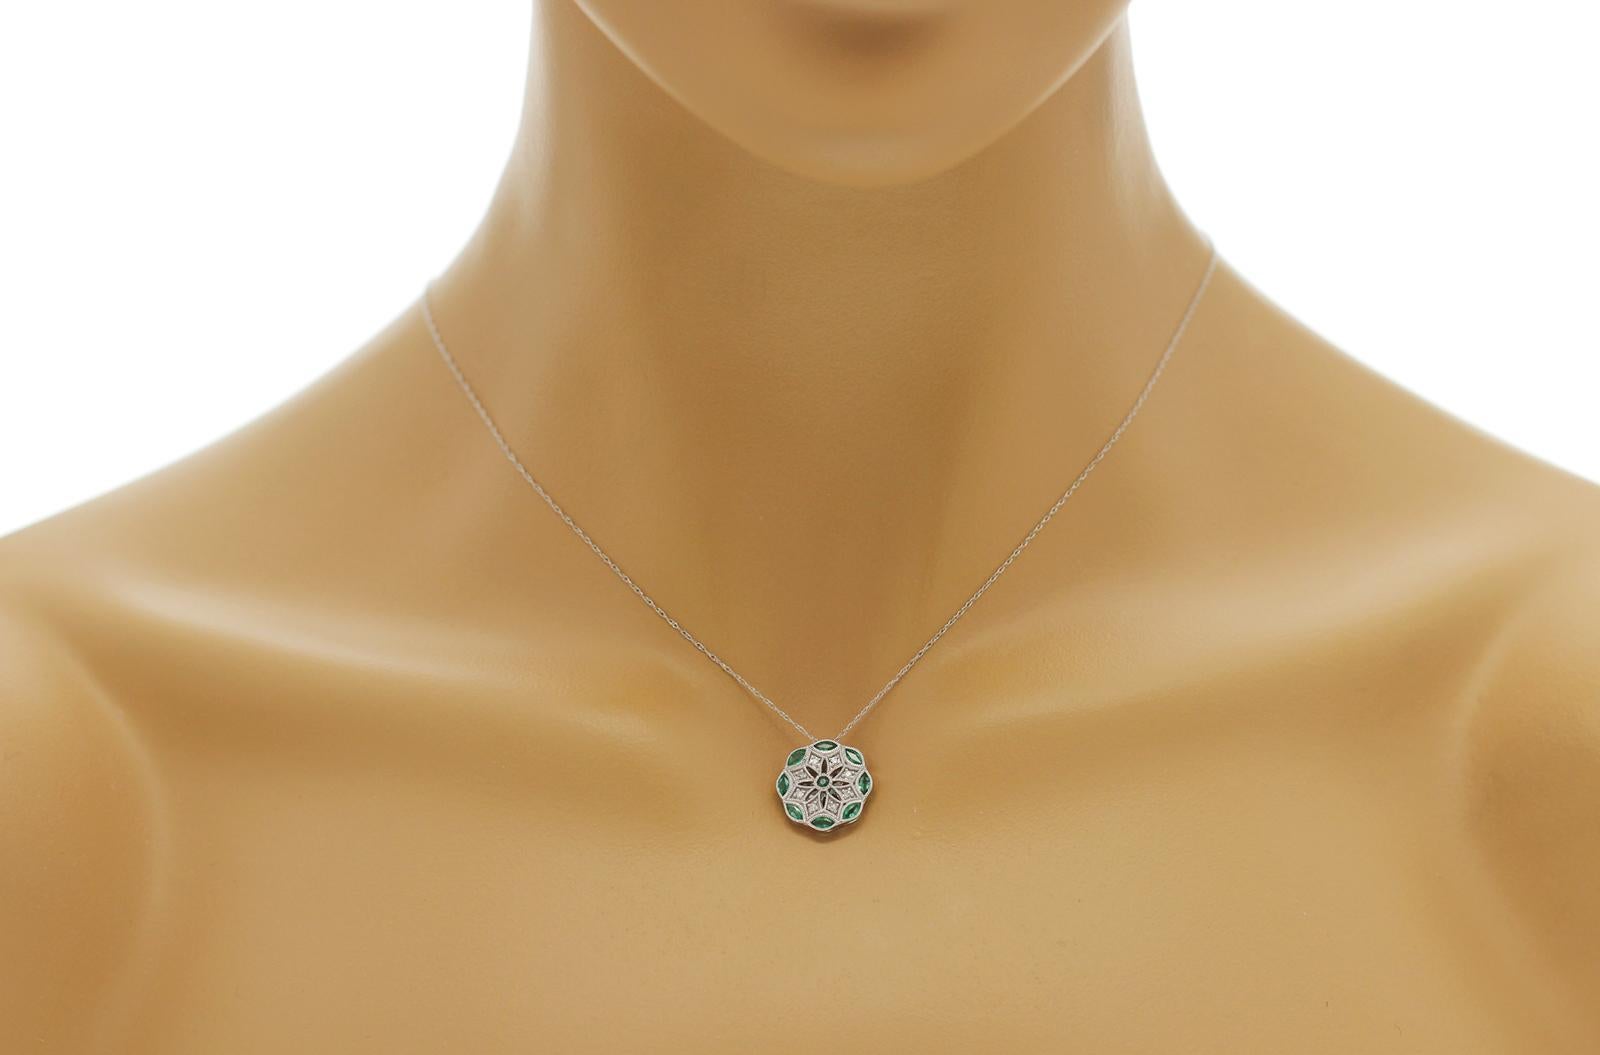 100% Authentic, 100% Customer Satisfaction

Pendant: 15 mm

Chain: 0.3 mm

Size:18 Inches

Metal: 14K White Gold

Hallmarks: 14K

Total Weight: 2.5 Grams

Stone Type: 0.55 CT Natural Emerald &  Diamond 0.10 CT  G   SI1

Condition: New With Tag